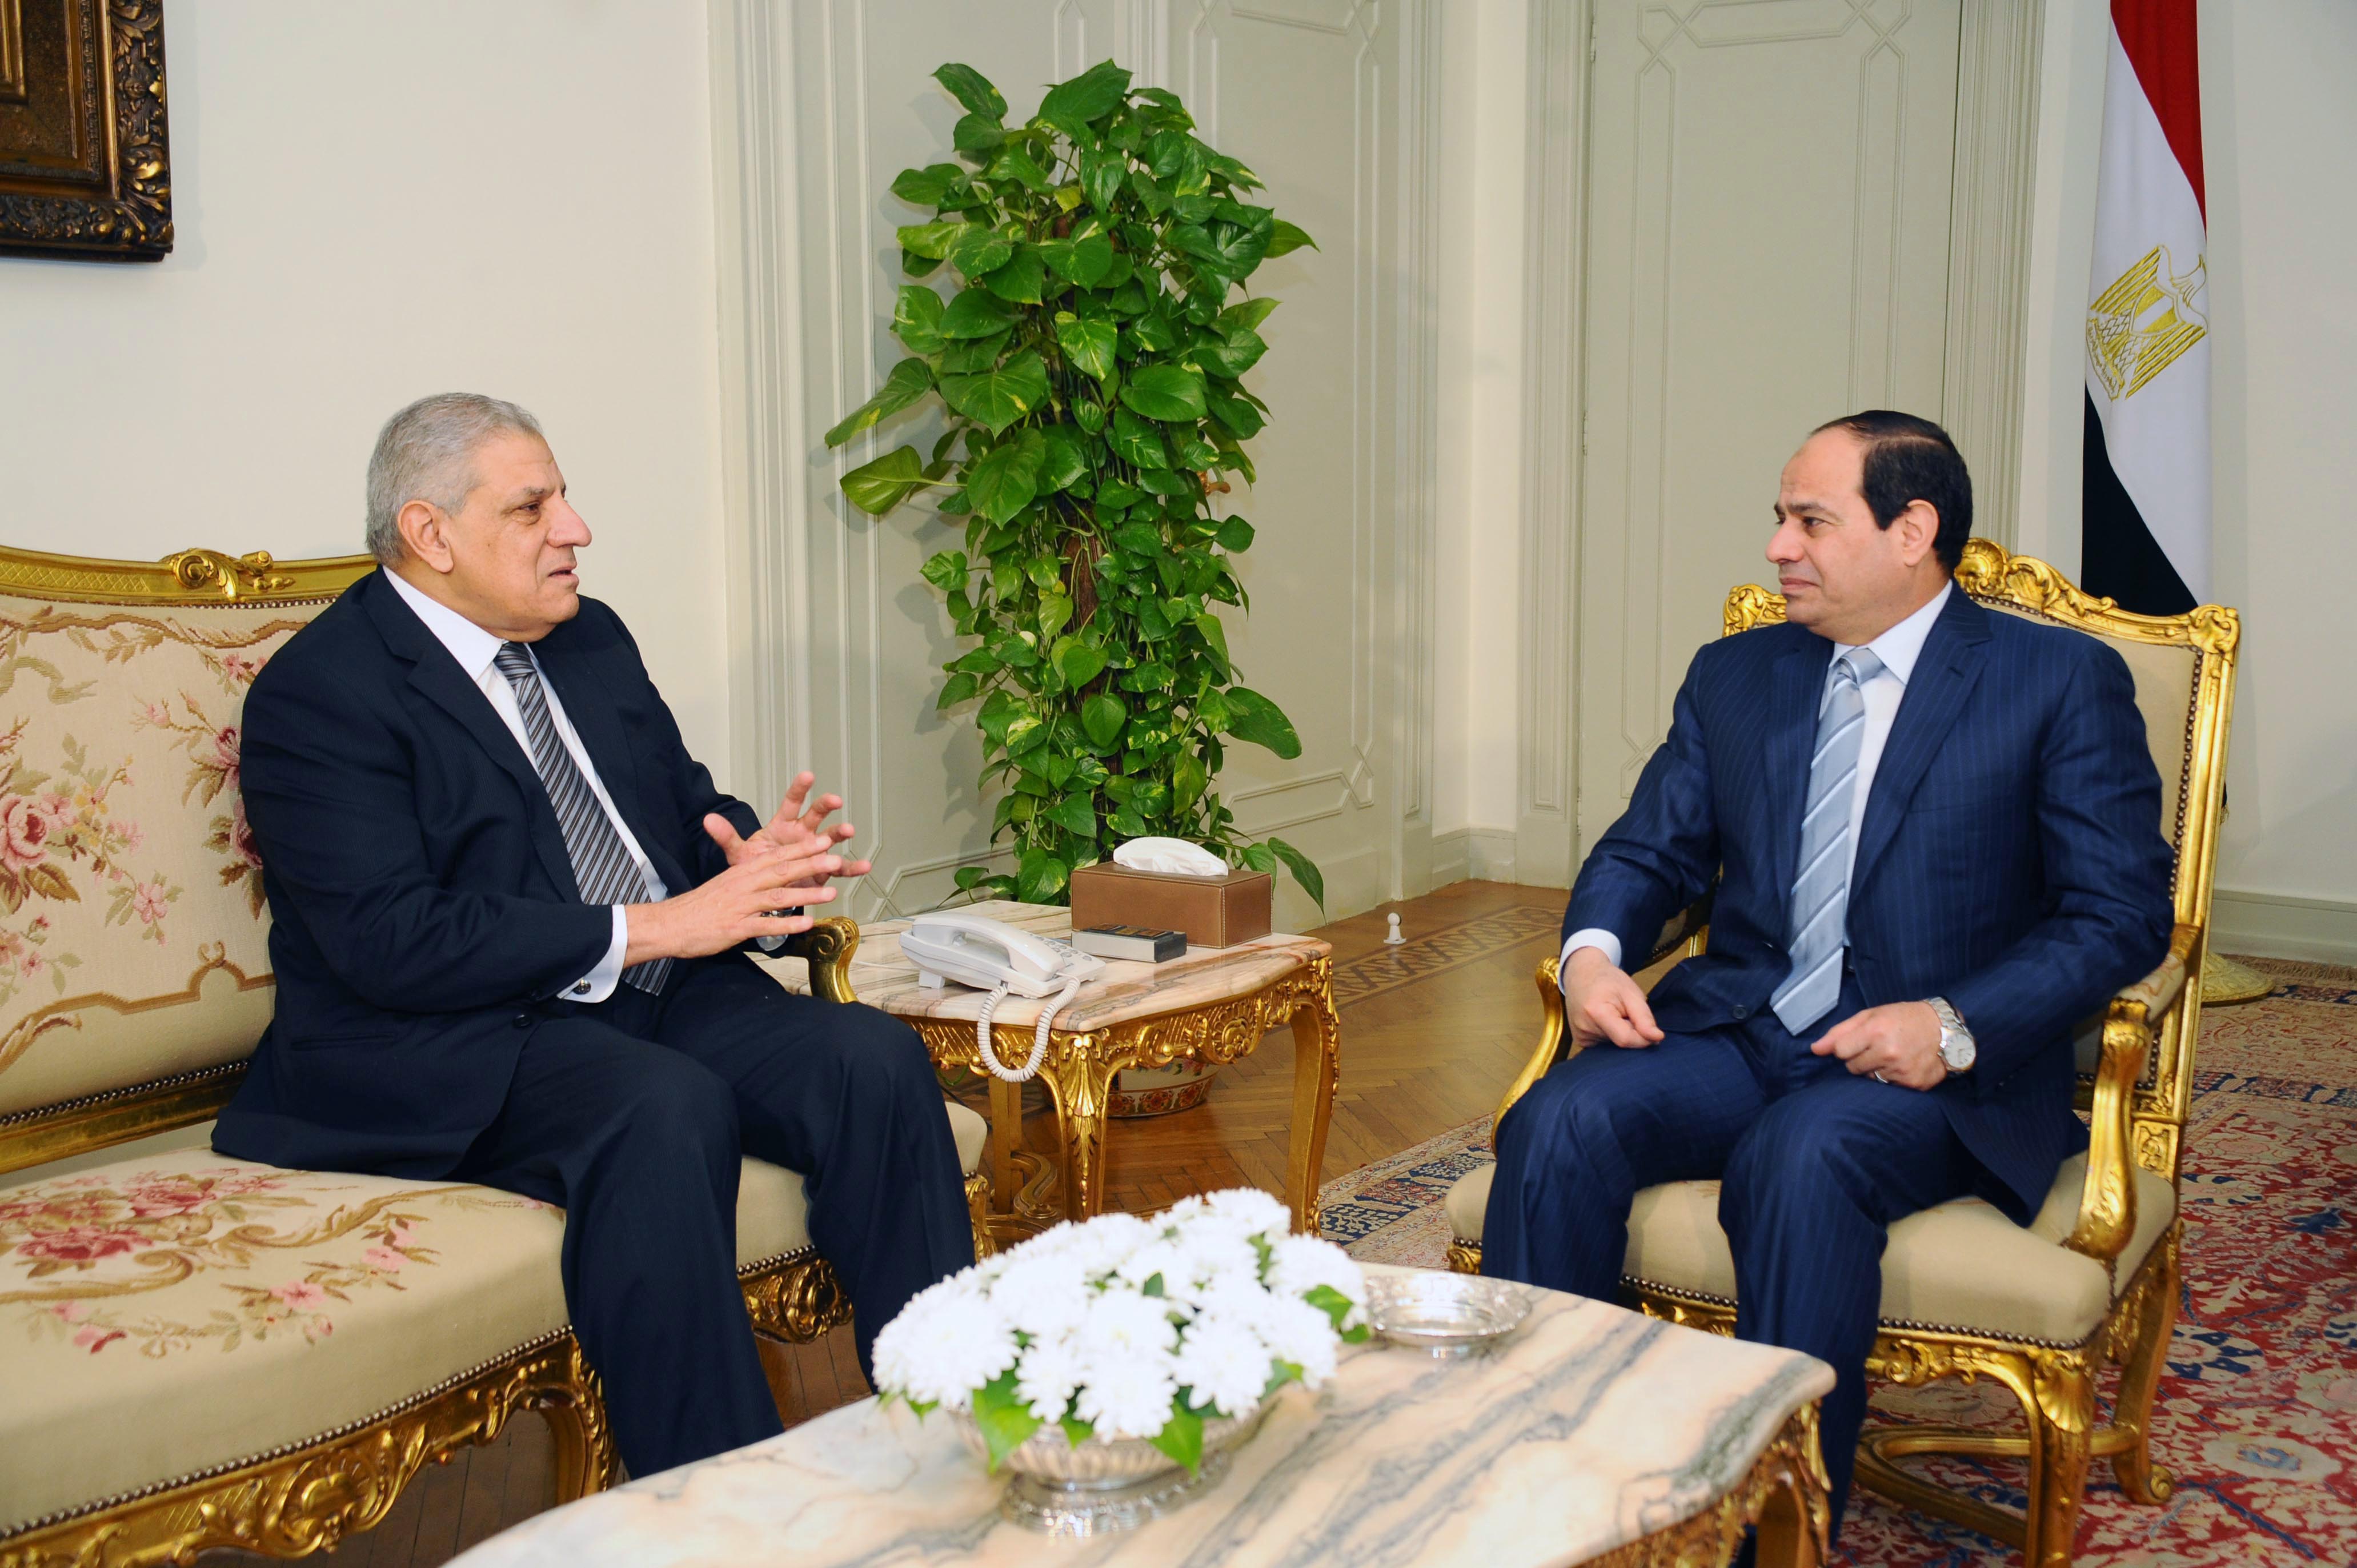 Sisi appoints Mehleb as his assistant for national and strategic projects – presidency